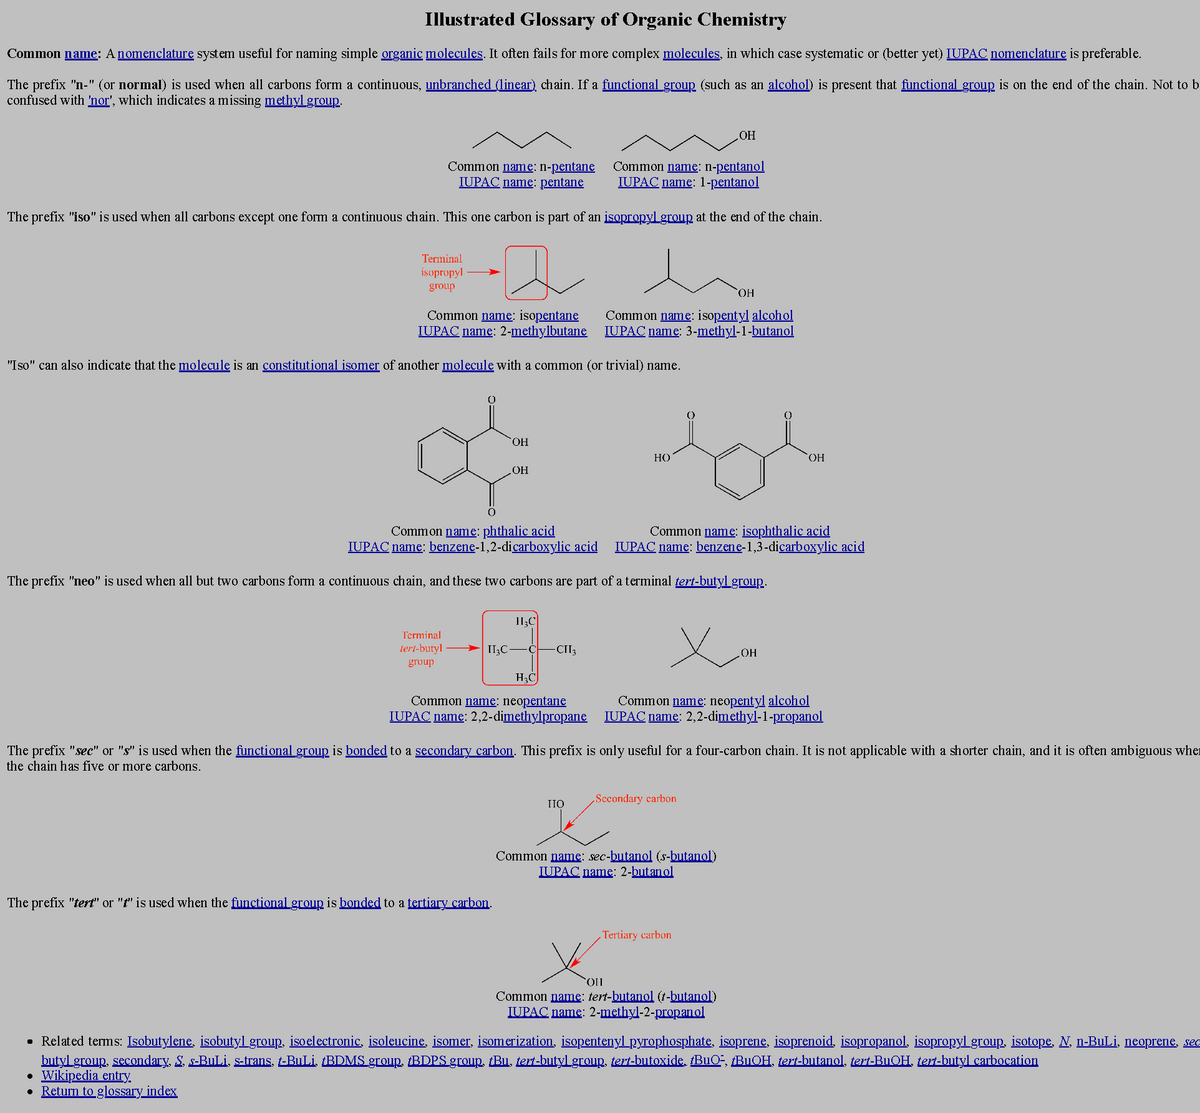 Illustrated Glossary of Organic Chemistry   Common names n, neo ...